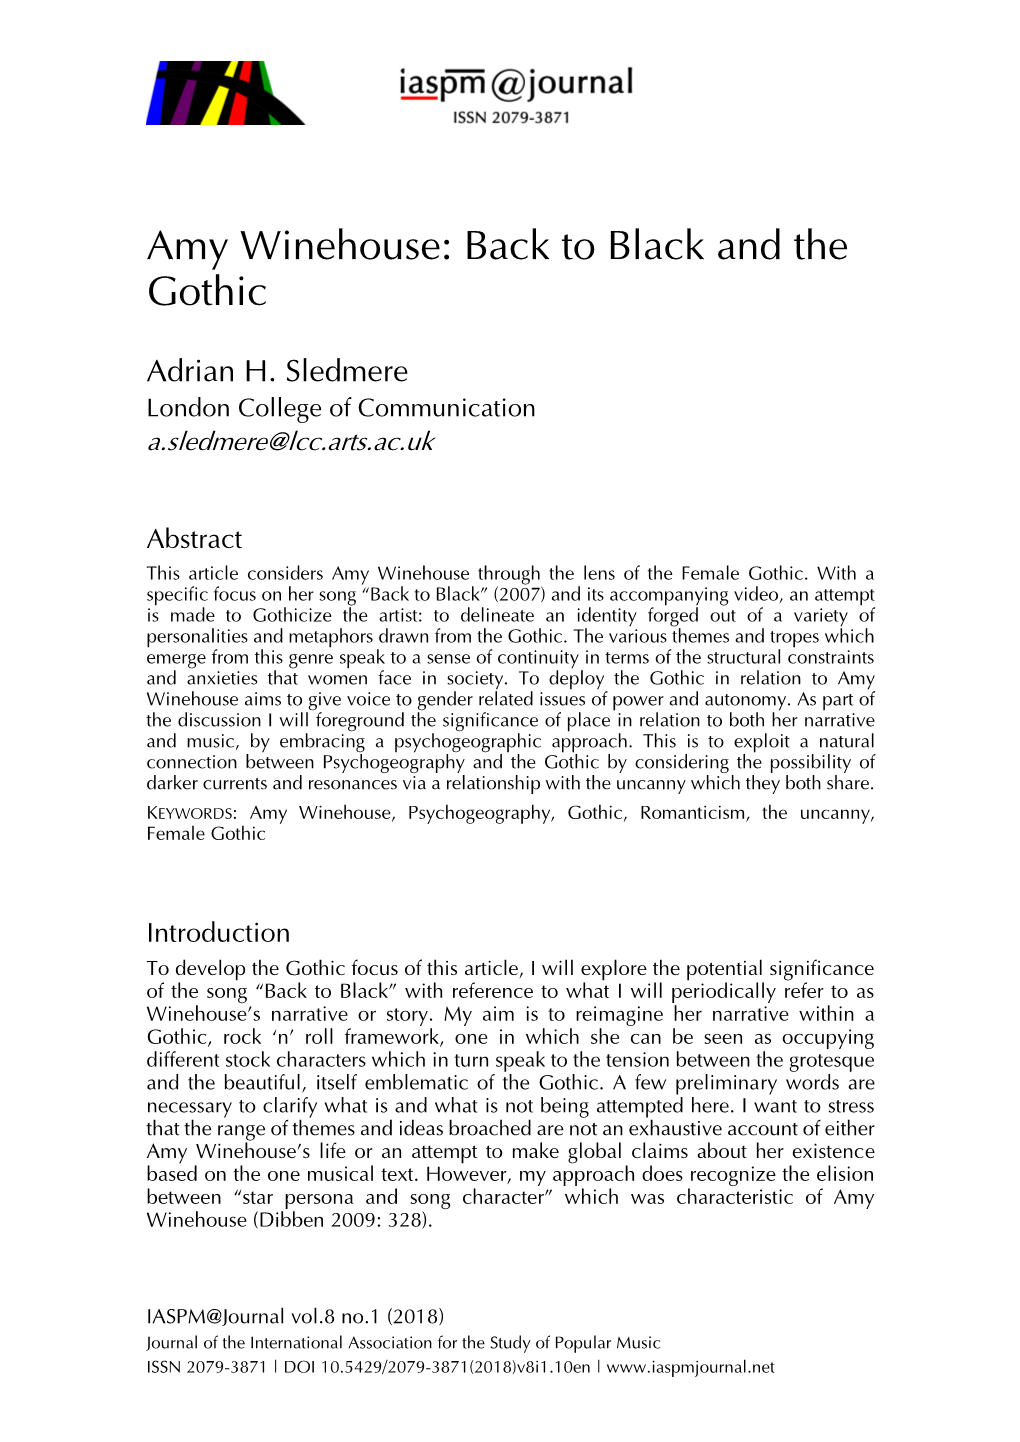 Amy Winehouse: Back to Black and the Gothic